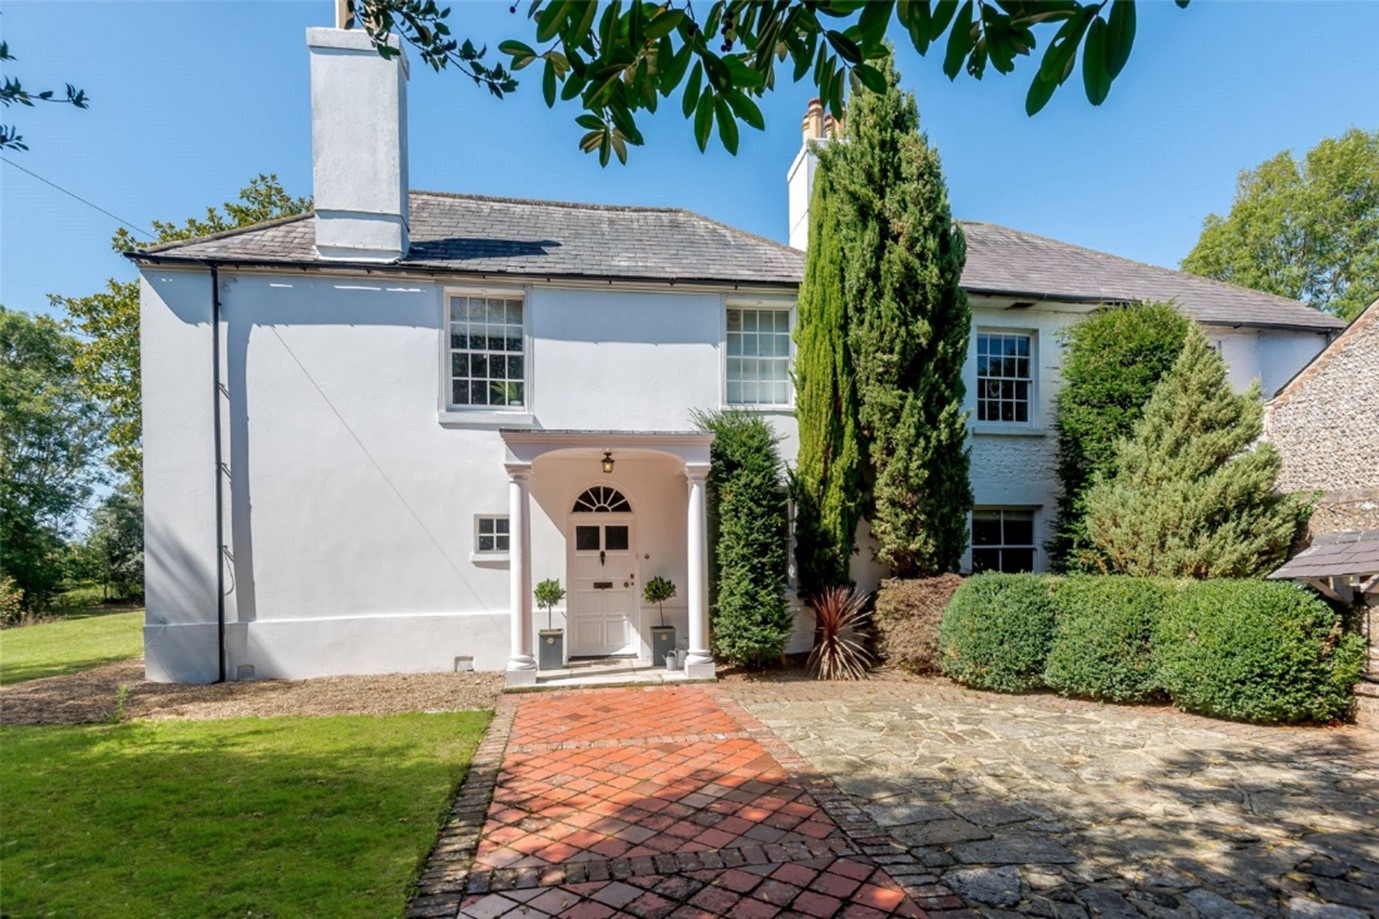 traditional Grade II Listed large white Norman family home